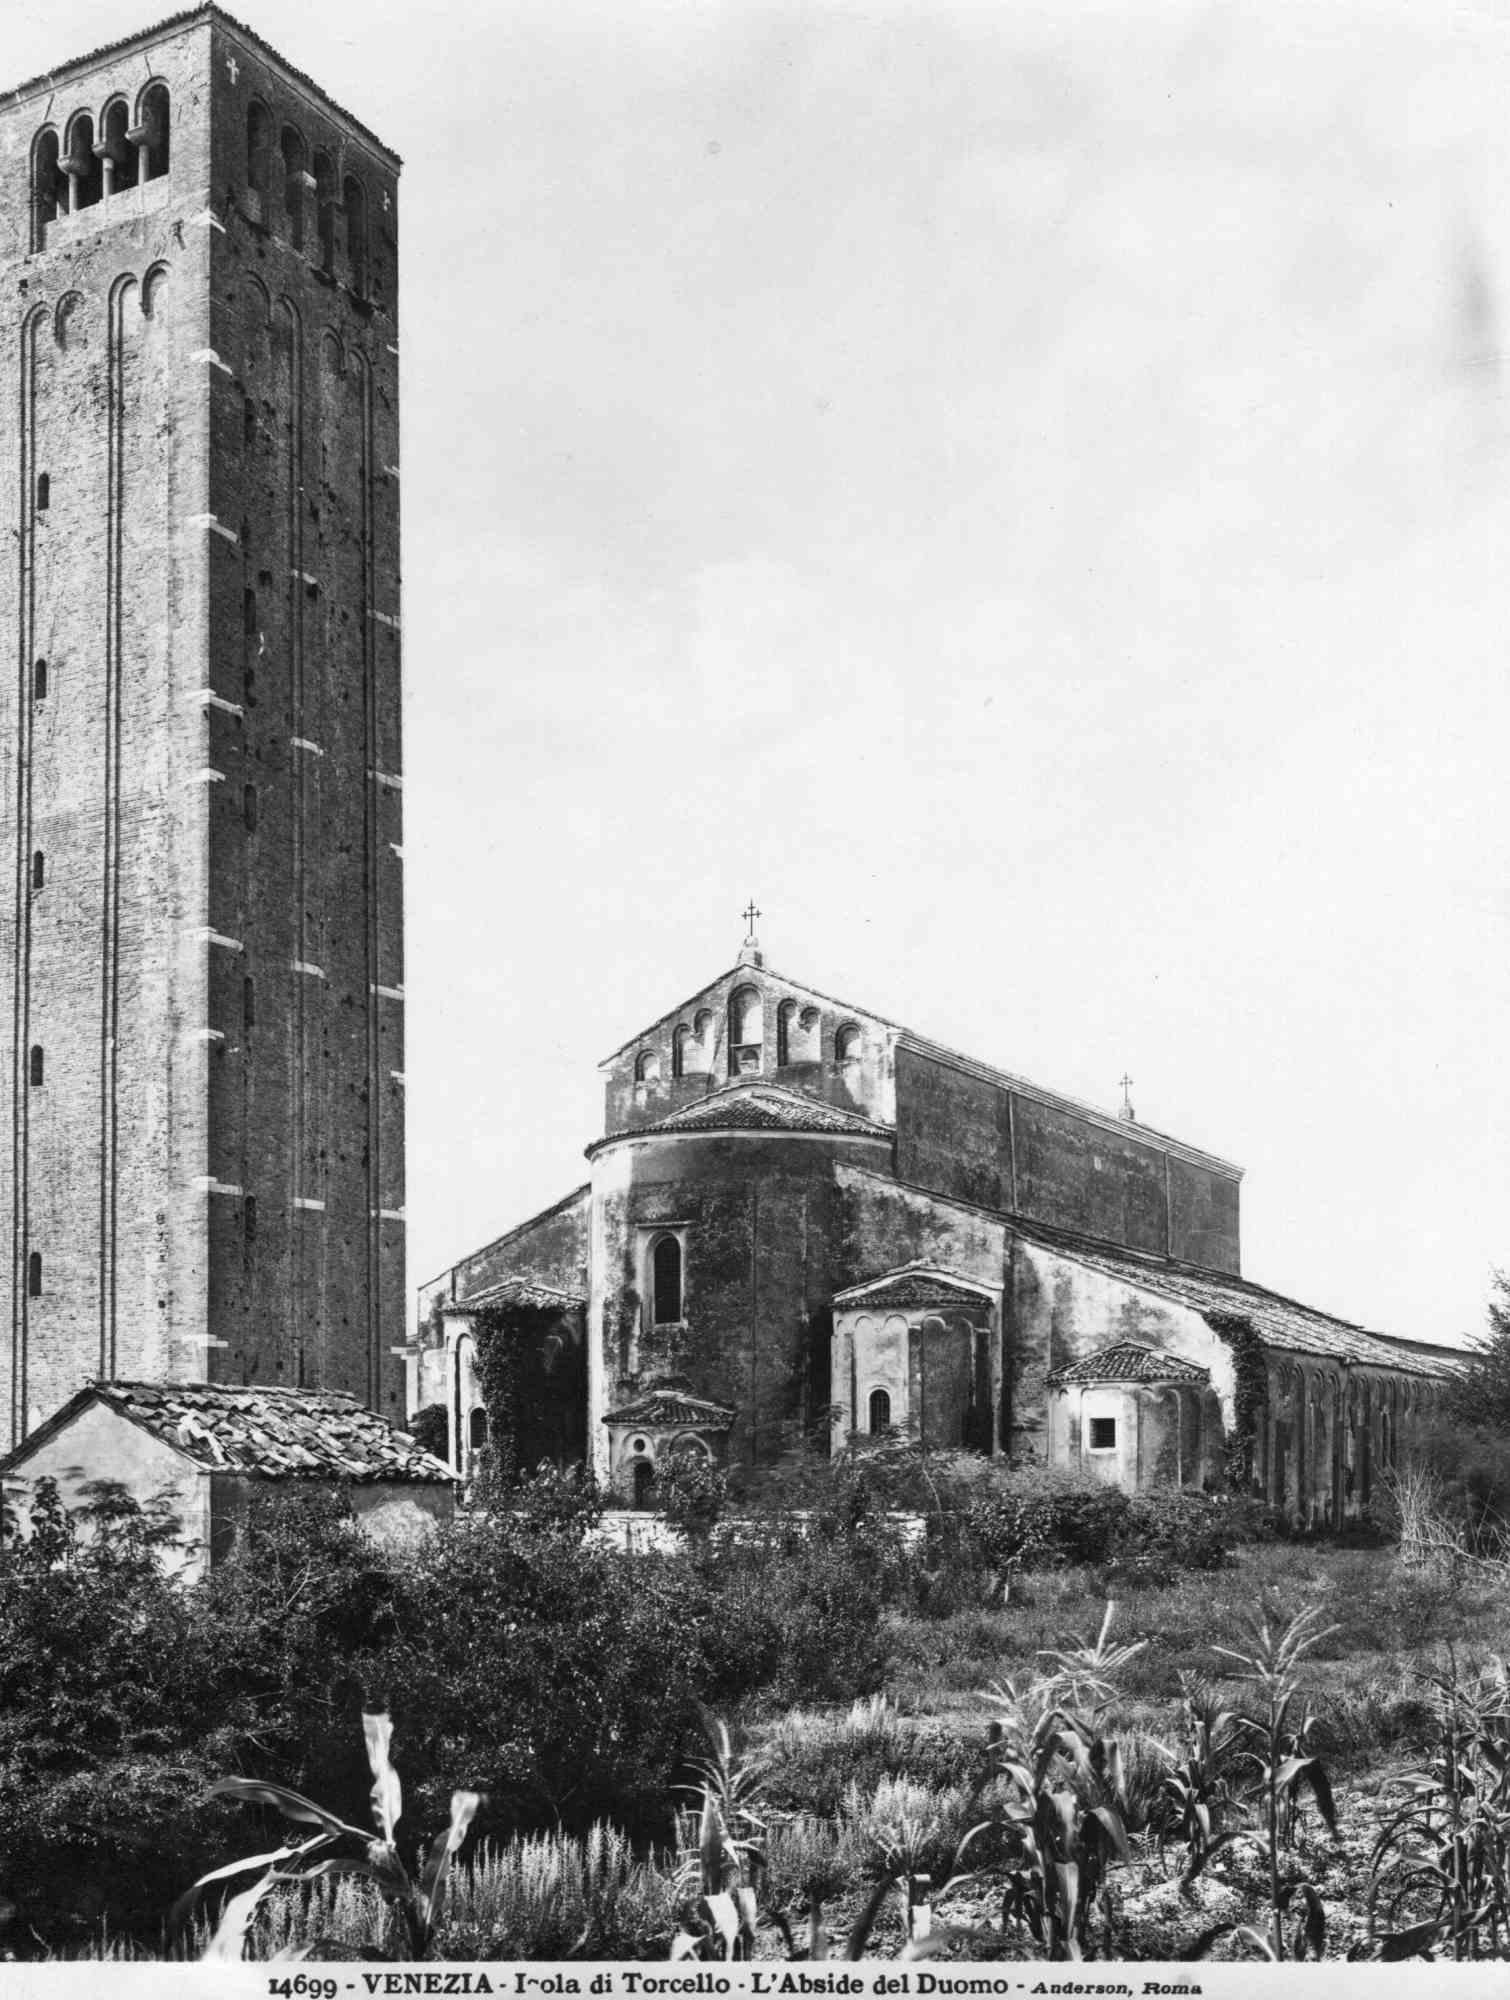 Torcello’s Cathedral - Vintage Photo  - Early 20th Century